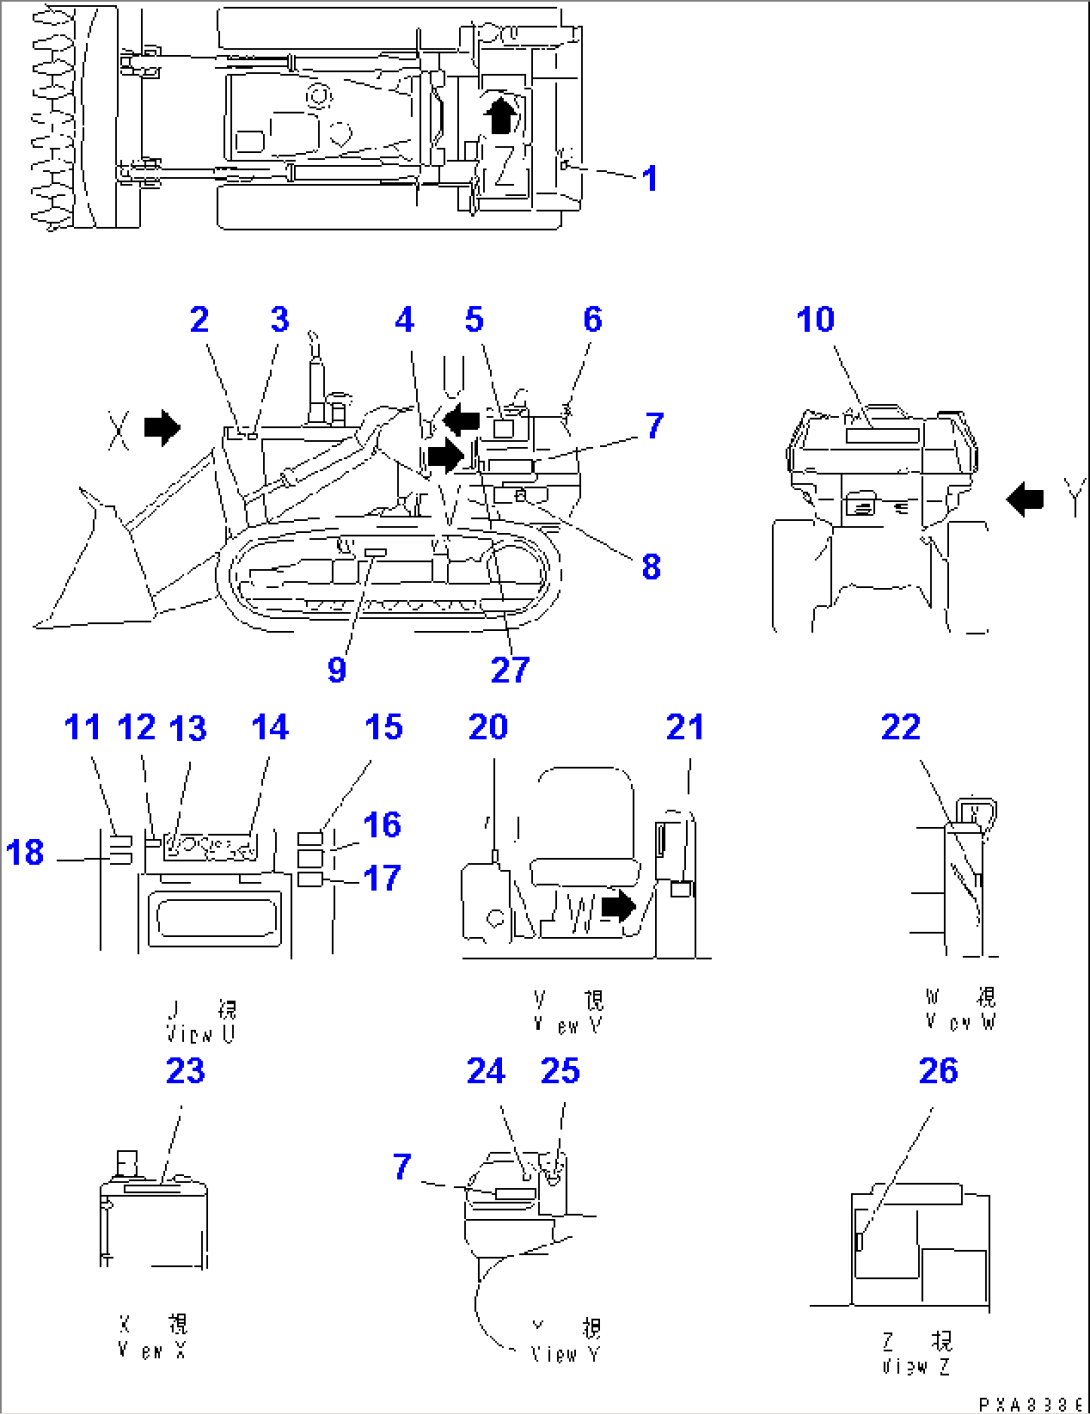 MARKS AND PLATES (ITALIAN) (NOISE SUPPRESSION FOR EC)(#15908-16500)